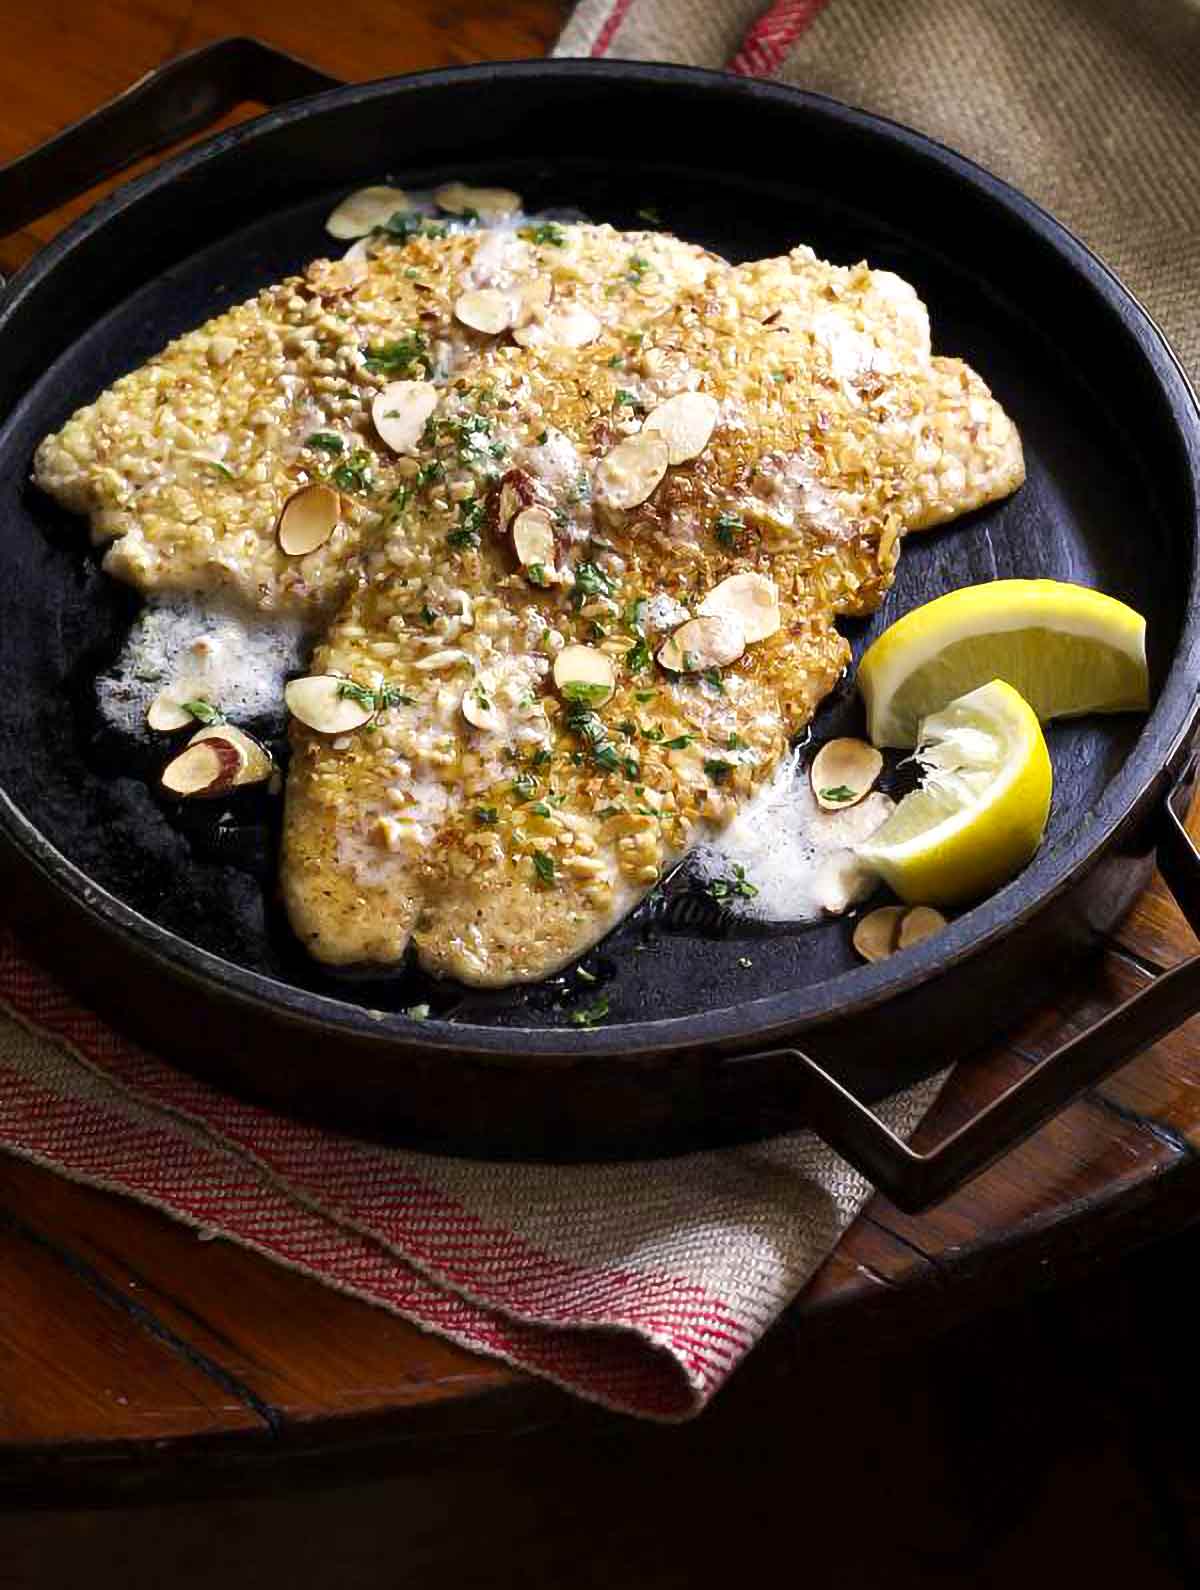 Almond flounder meunière by Dorie Greenspan in a wooden serving dish topped with sliced almonds and lemon wedges on the side.